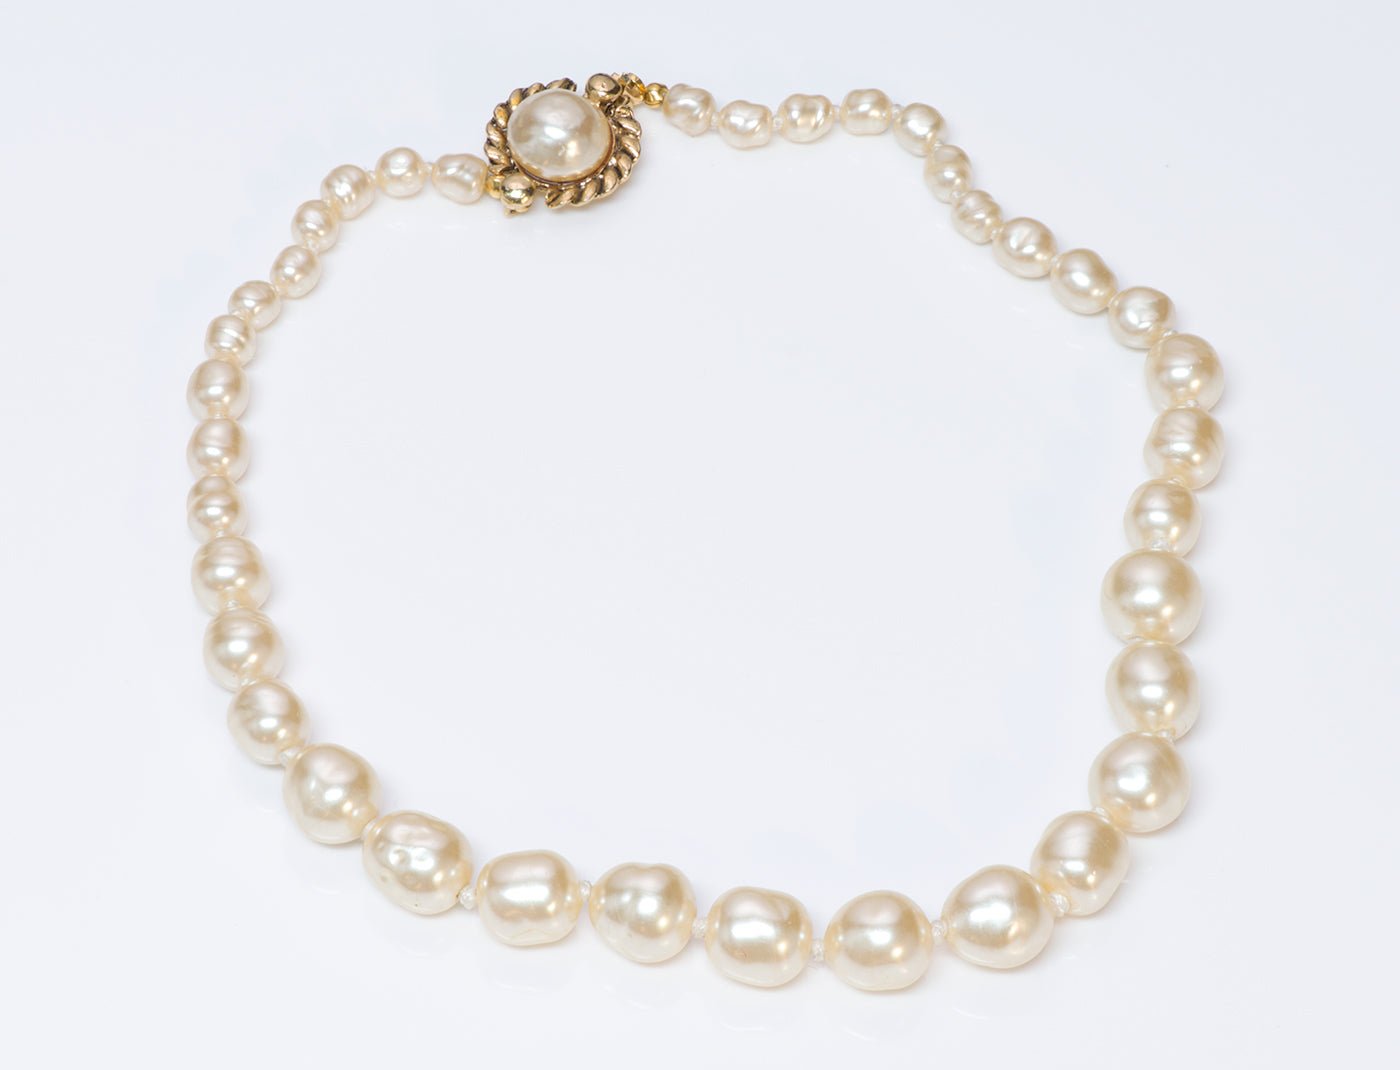 Vintage Chanel 1981 Pearl Strand Necklace